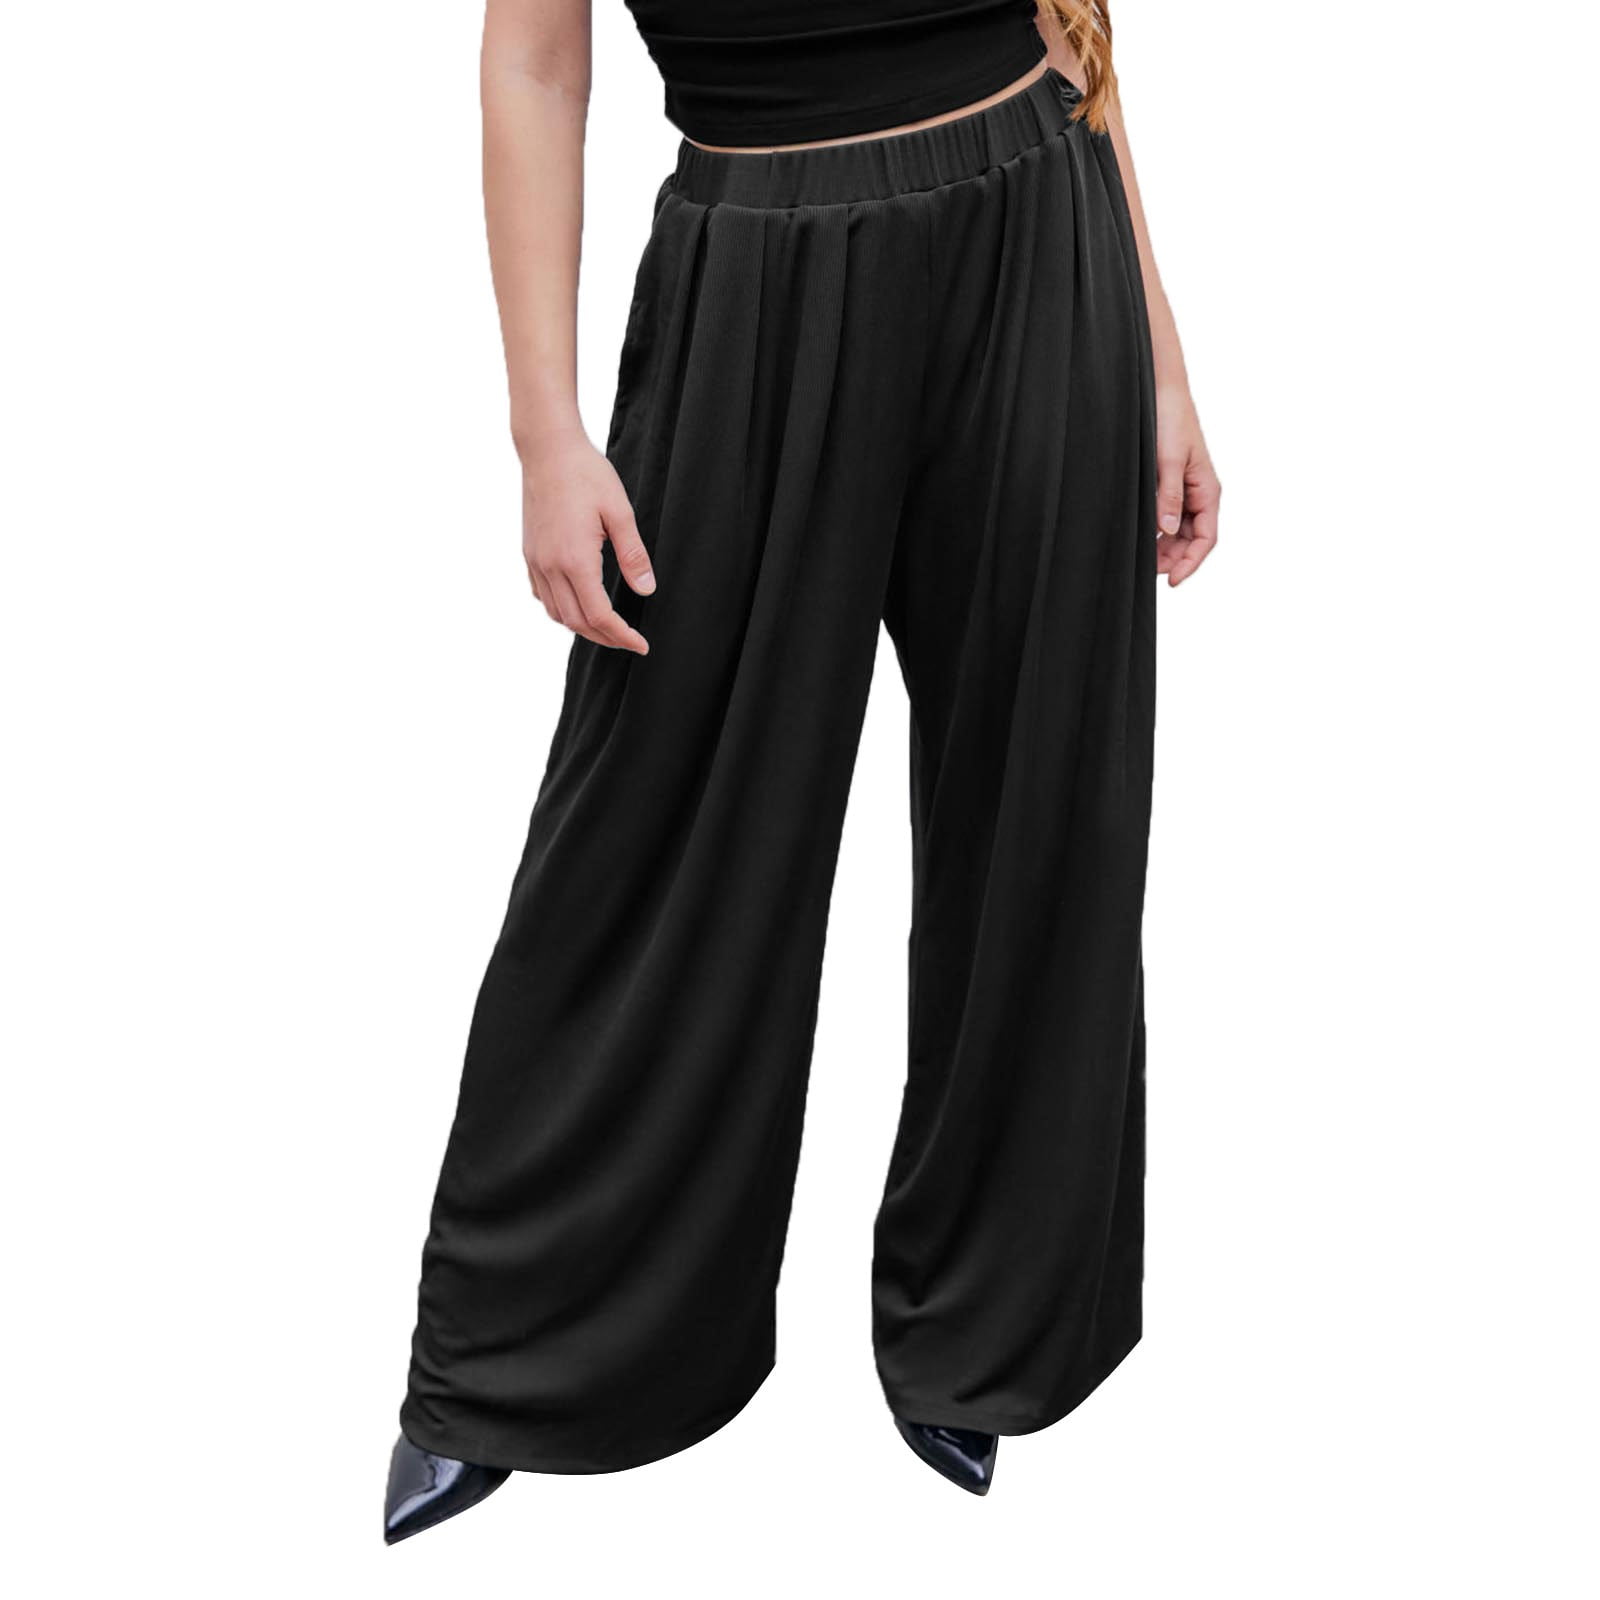 on Pants for Women Casual Woman Relaxed Fit Baggy Clothes Black Pants ...